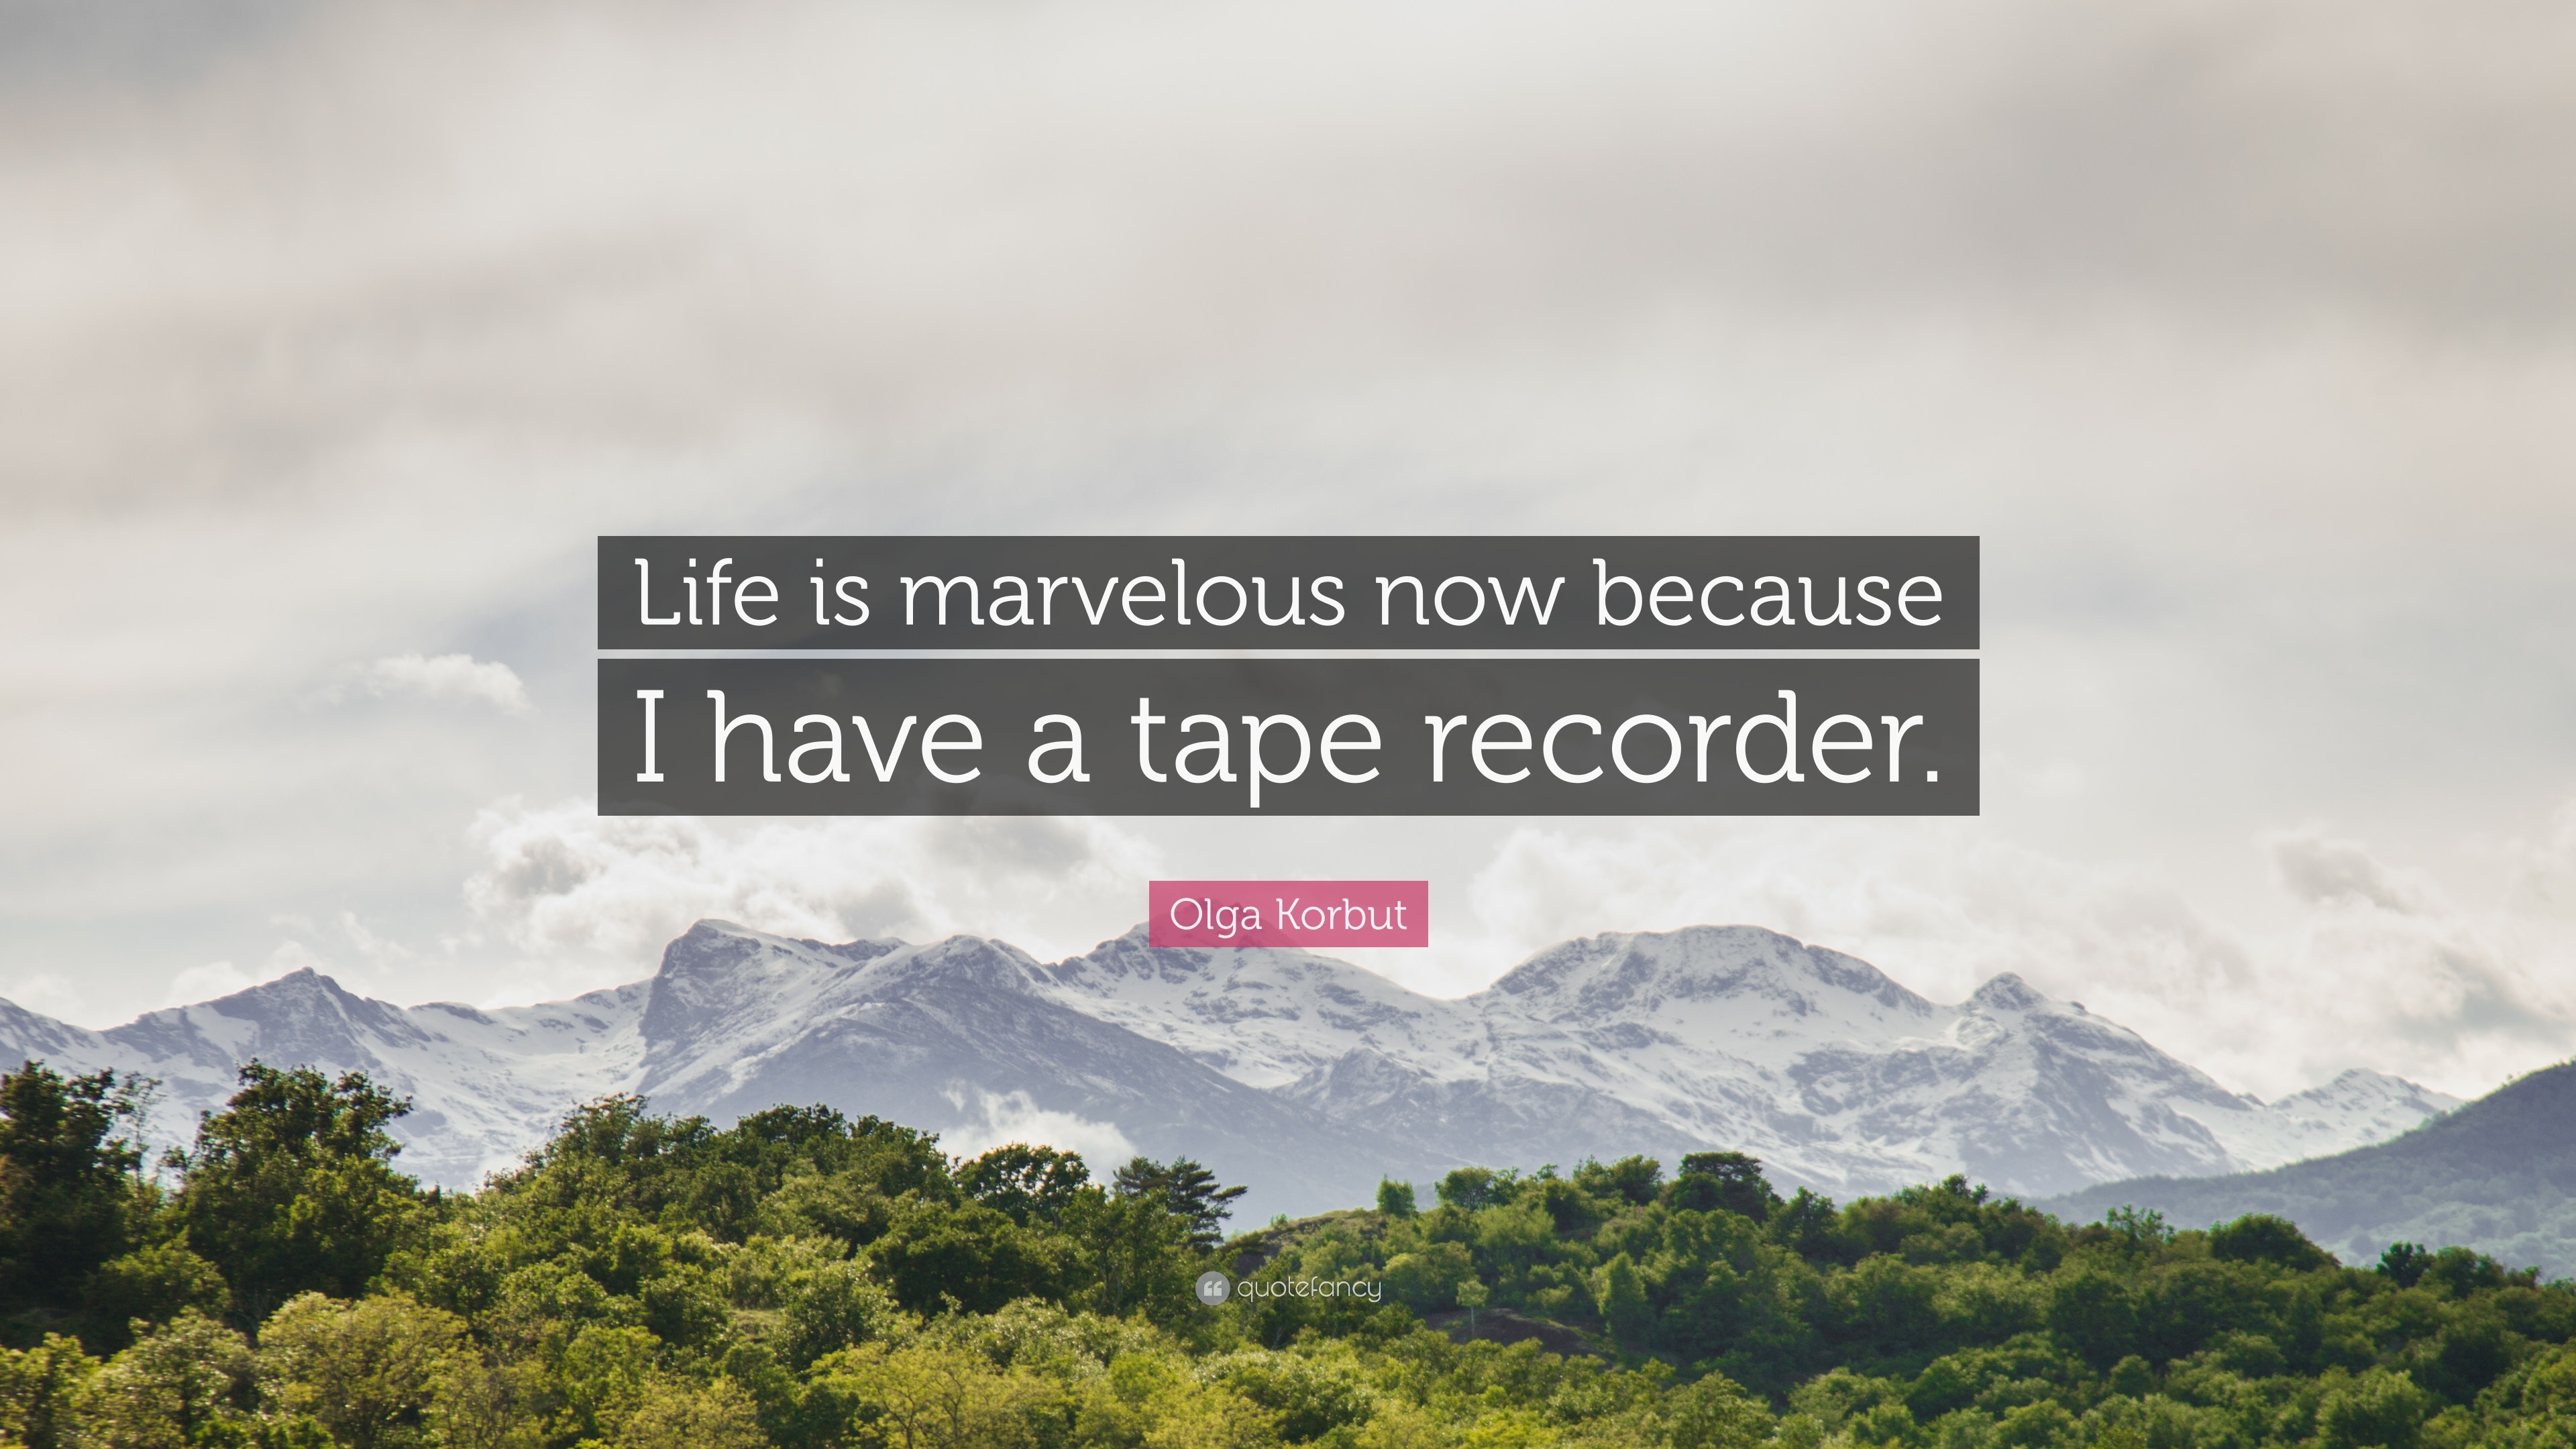 https://quotefancy.com/media/wallpaper/3840x2160/1302485-Olga-Korbut-Quote-Life-is-marvelous-now-because-I-have-a-tape.jpg